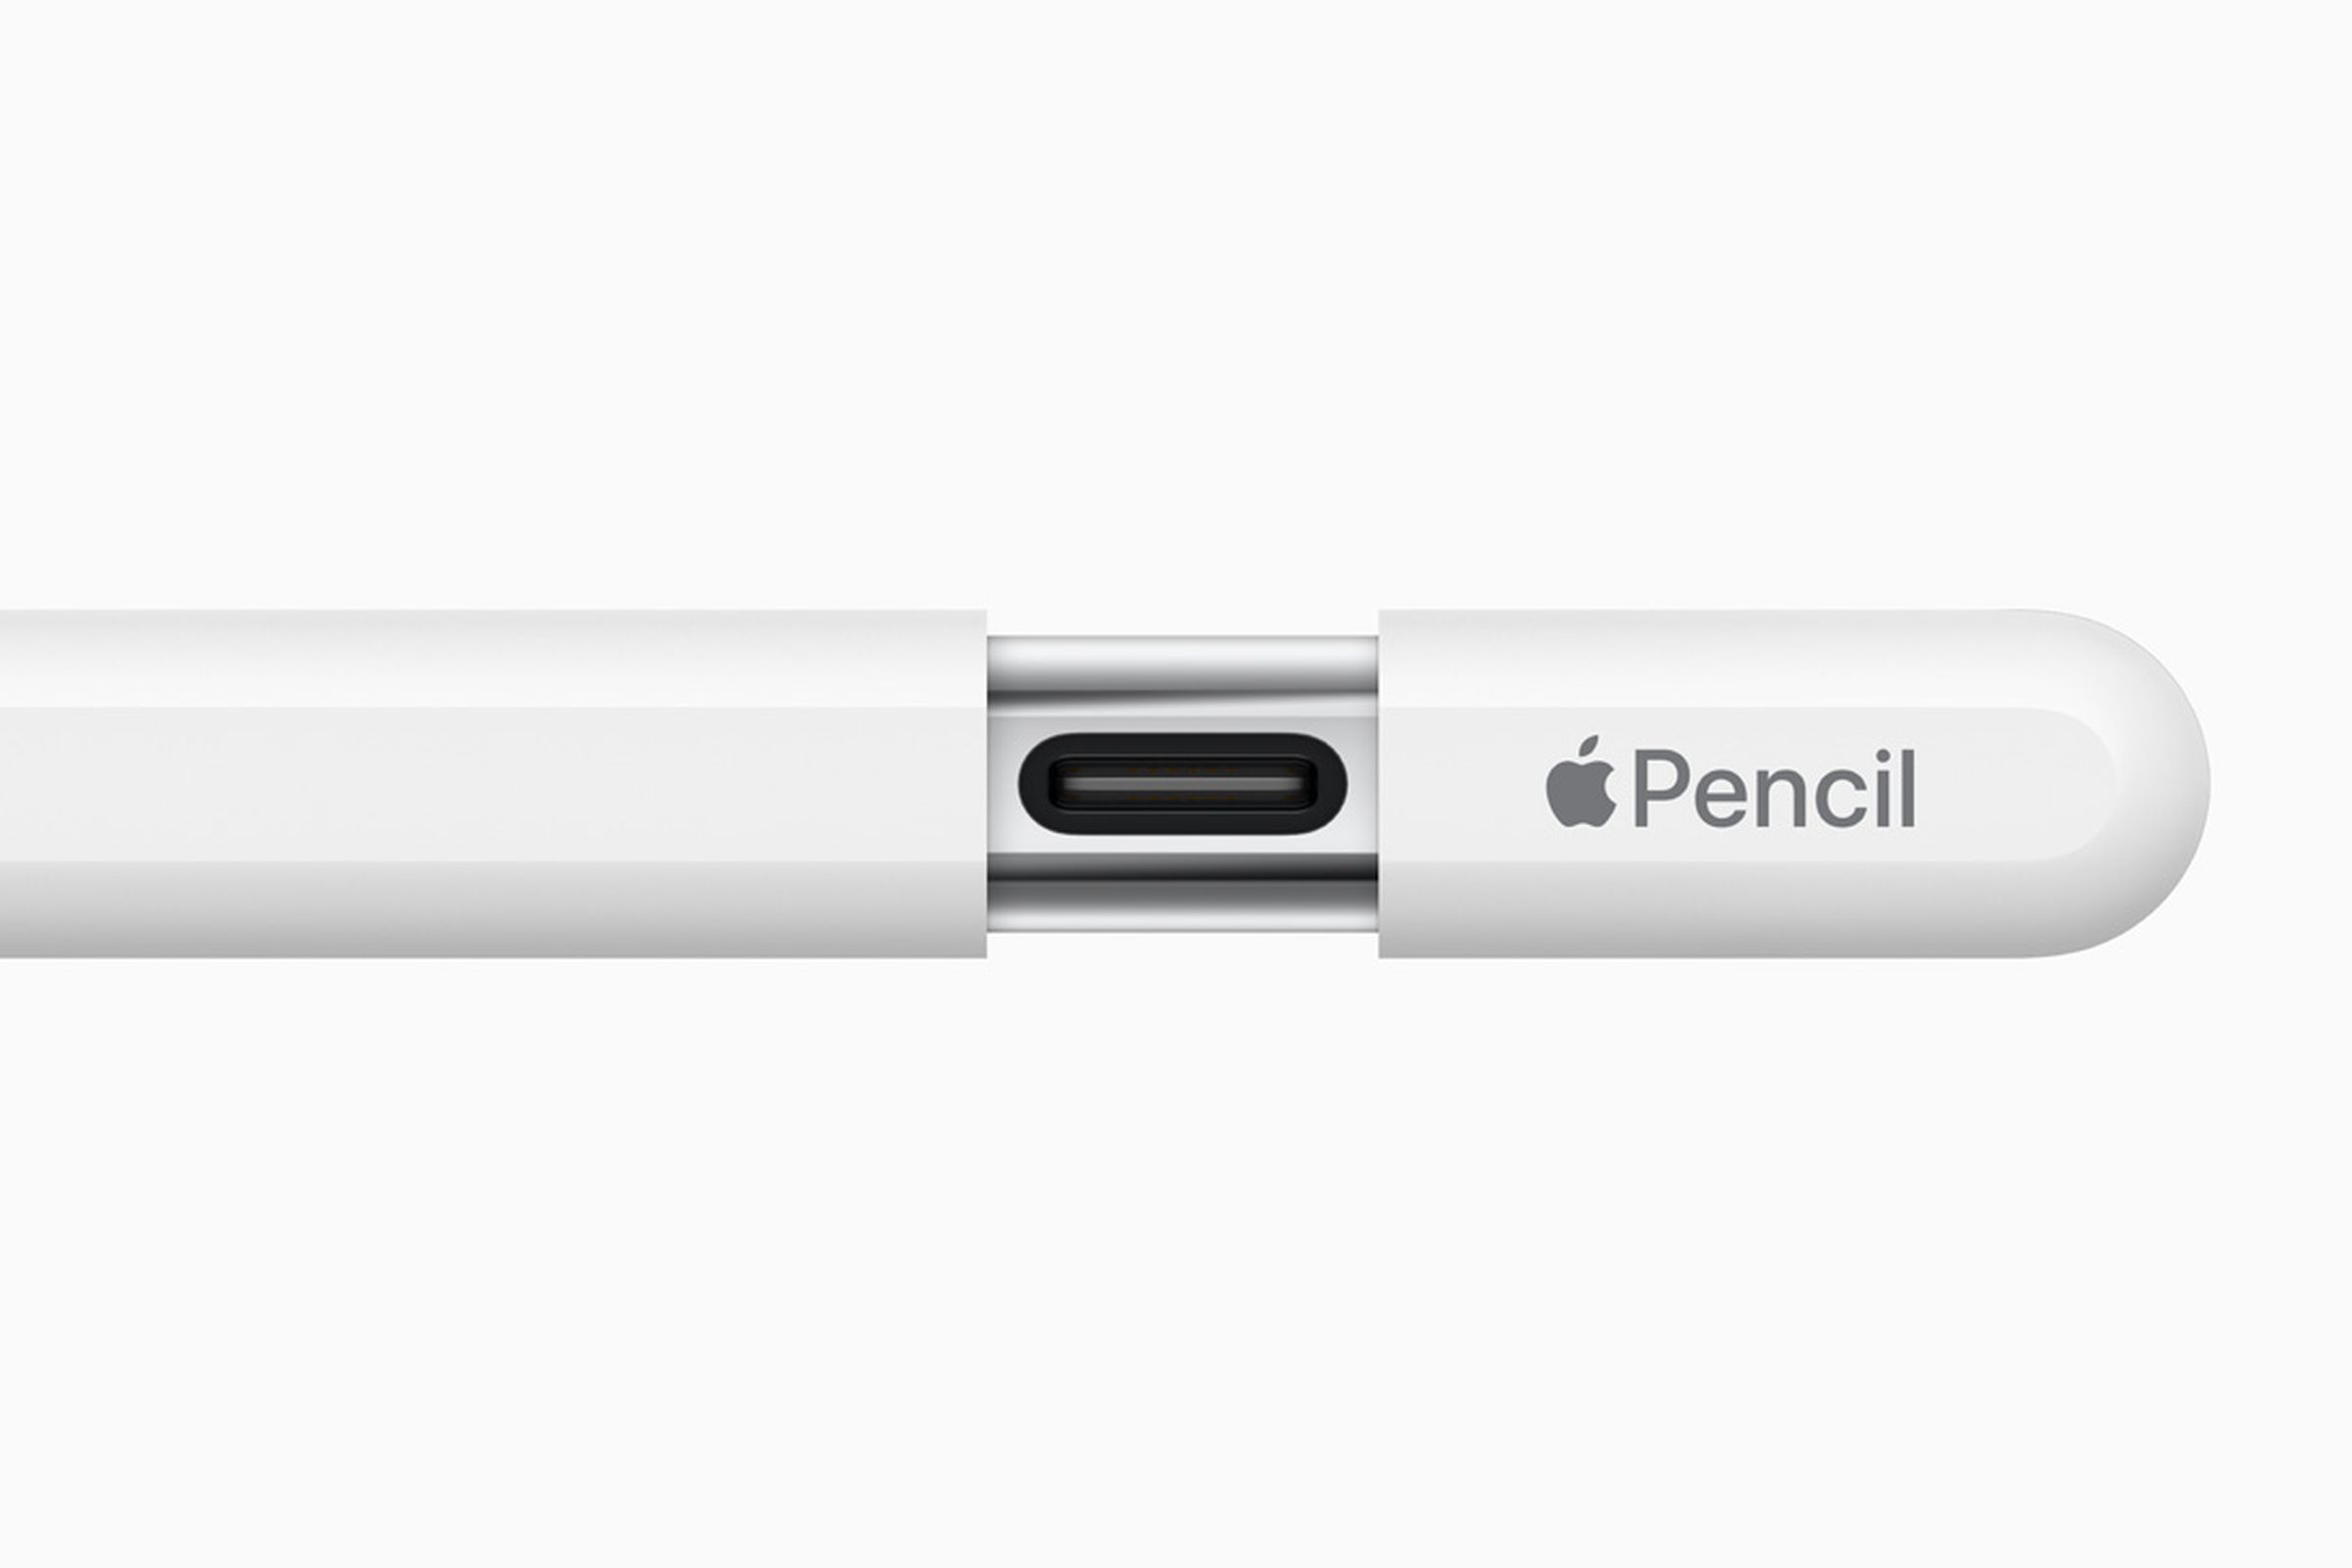 An image of Apple’s new Apple Pencil with USB-C.